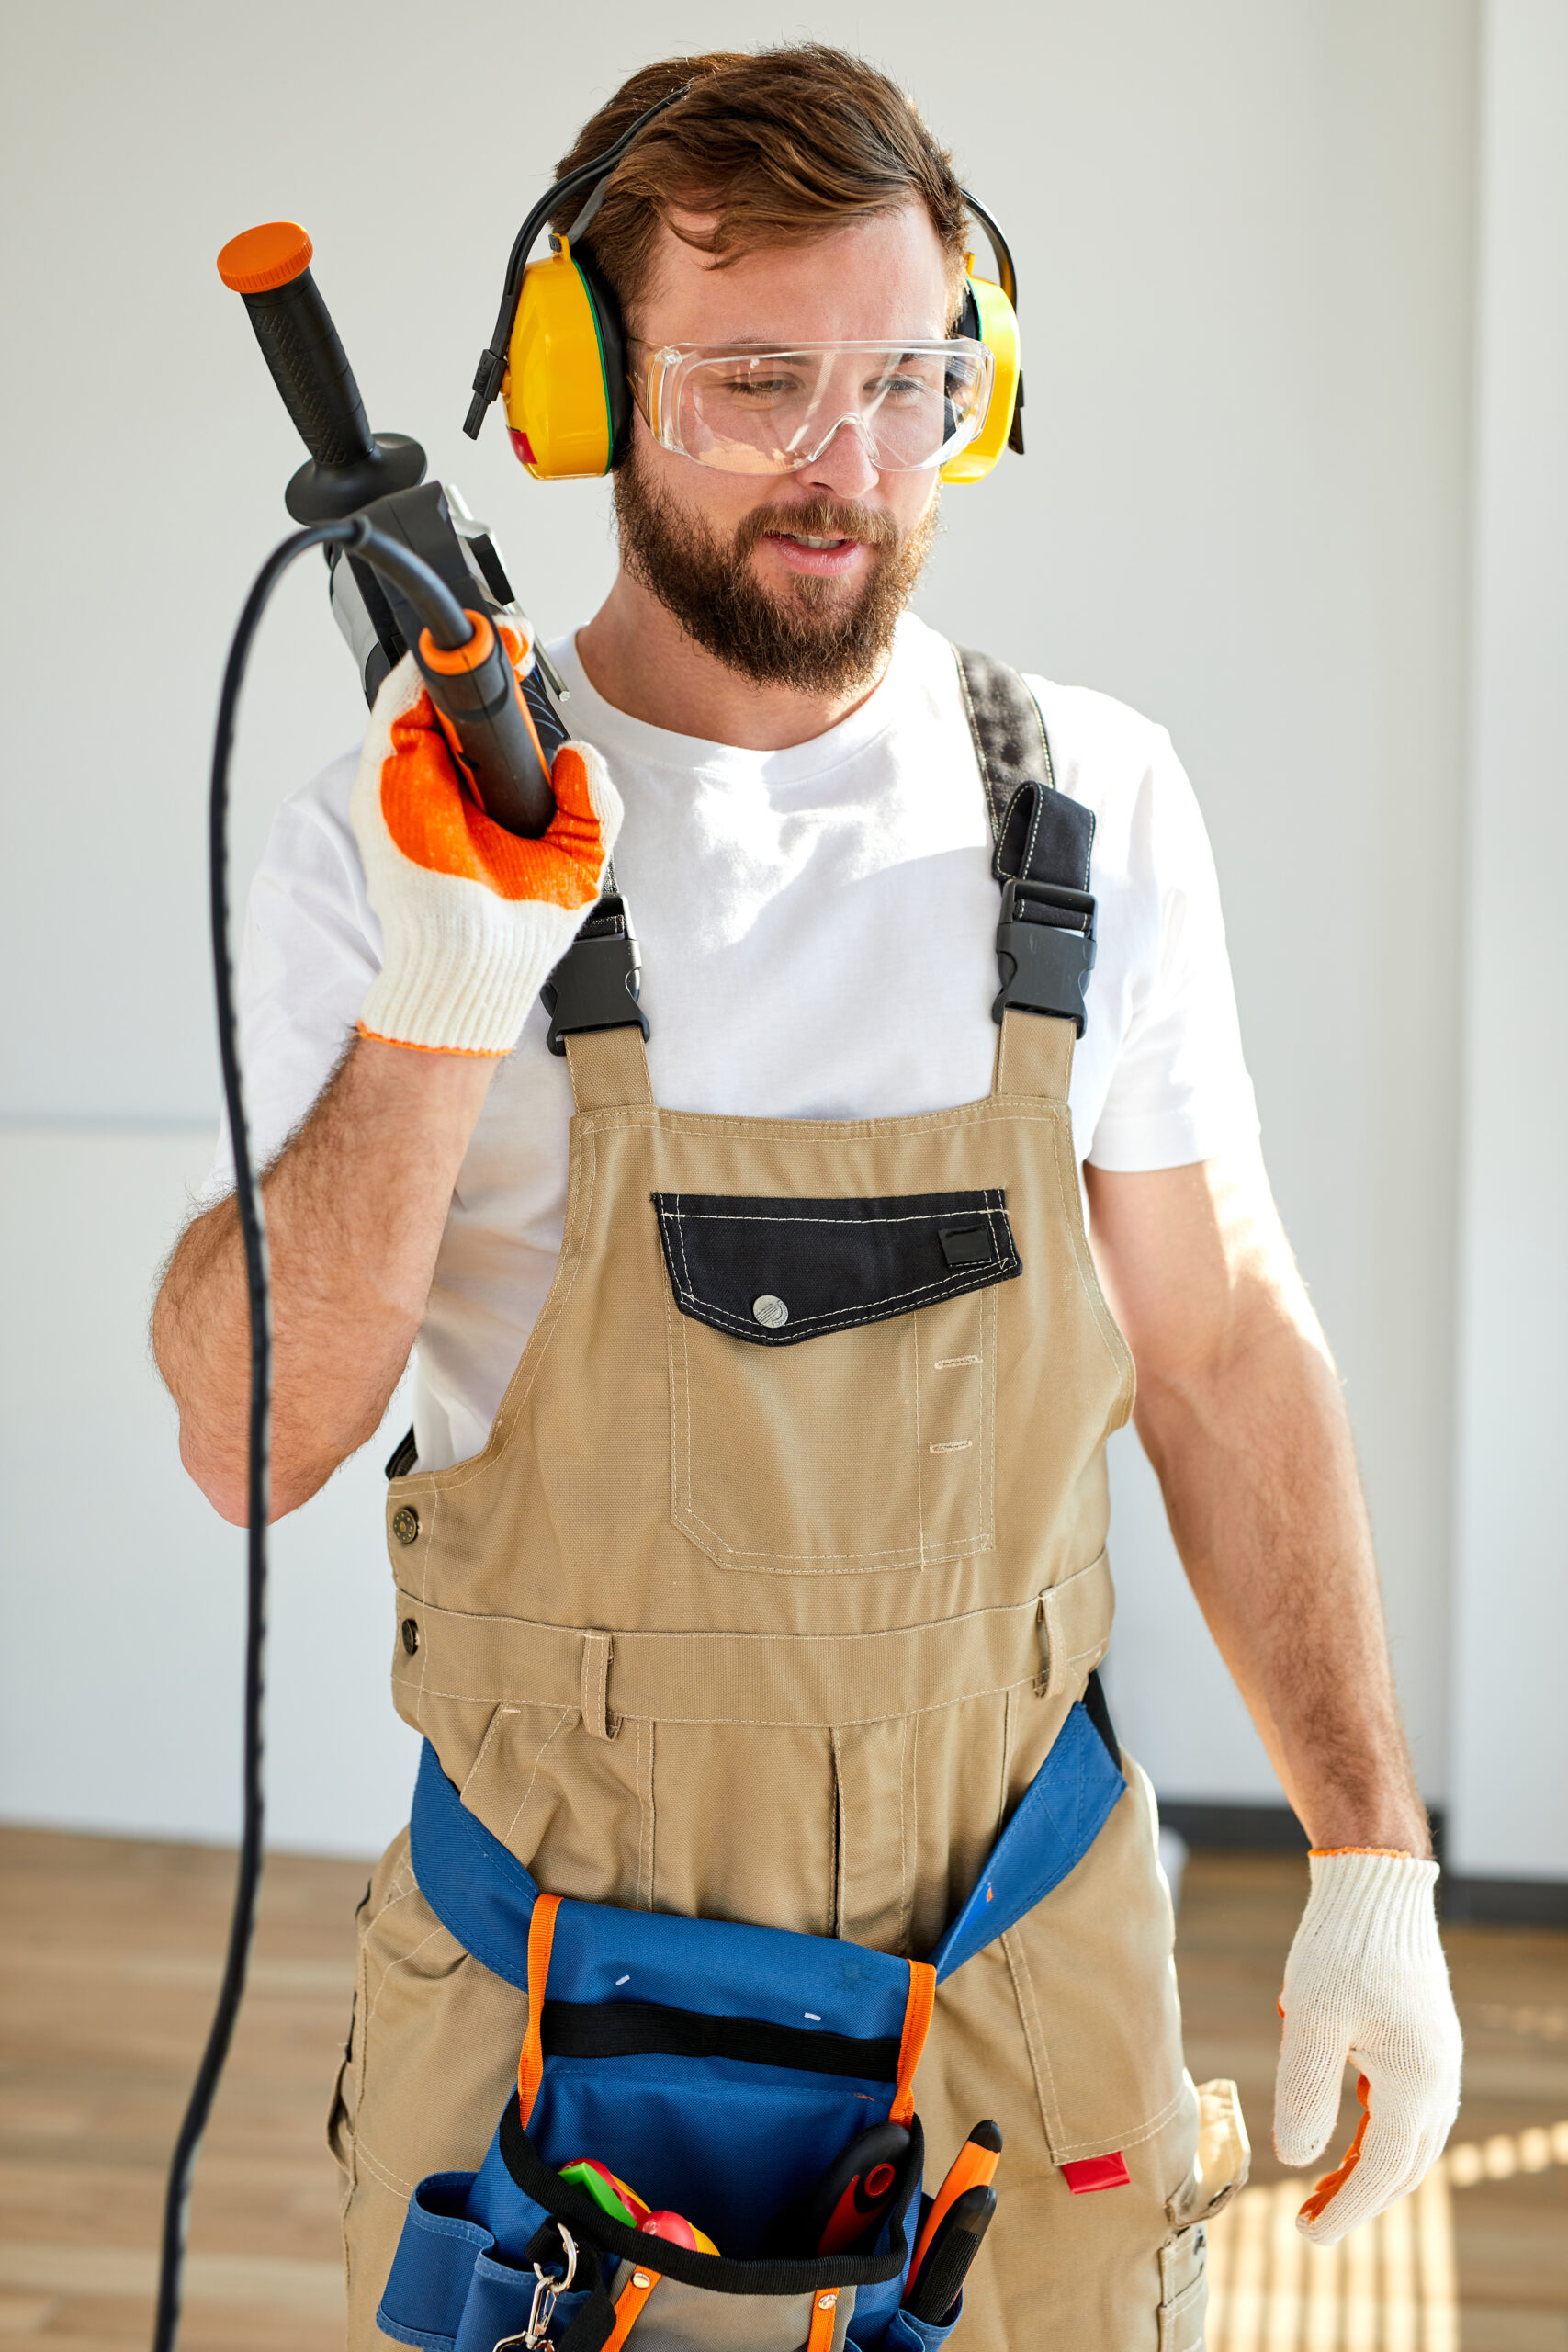 Young caucasian man holding power drill standing in front of white wall indoors,posing at camera, wearing overalls, headset and safety glasses. copy space, concept for home DIY - Safety Equipment You need when Doing DIY in the Home